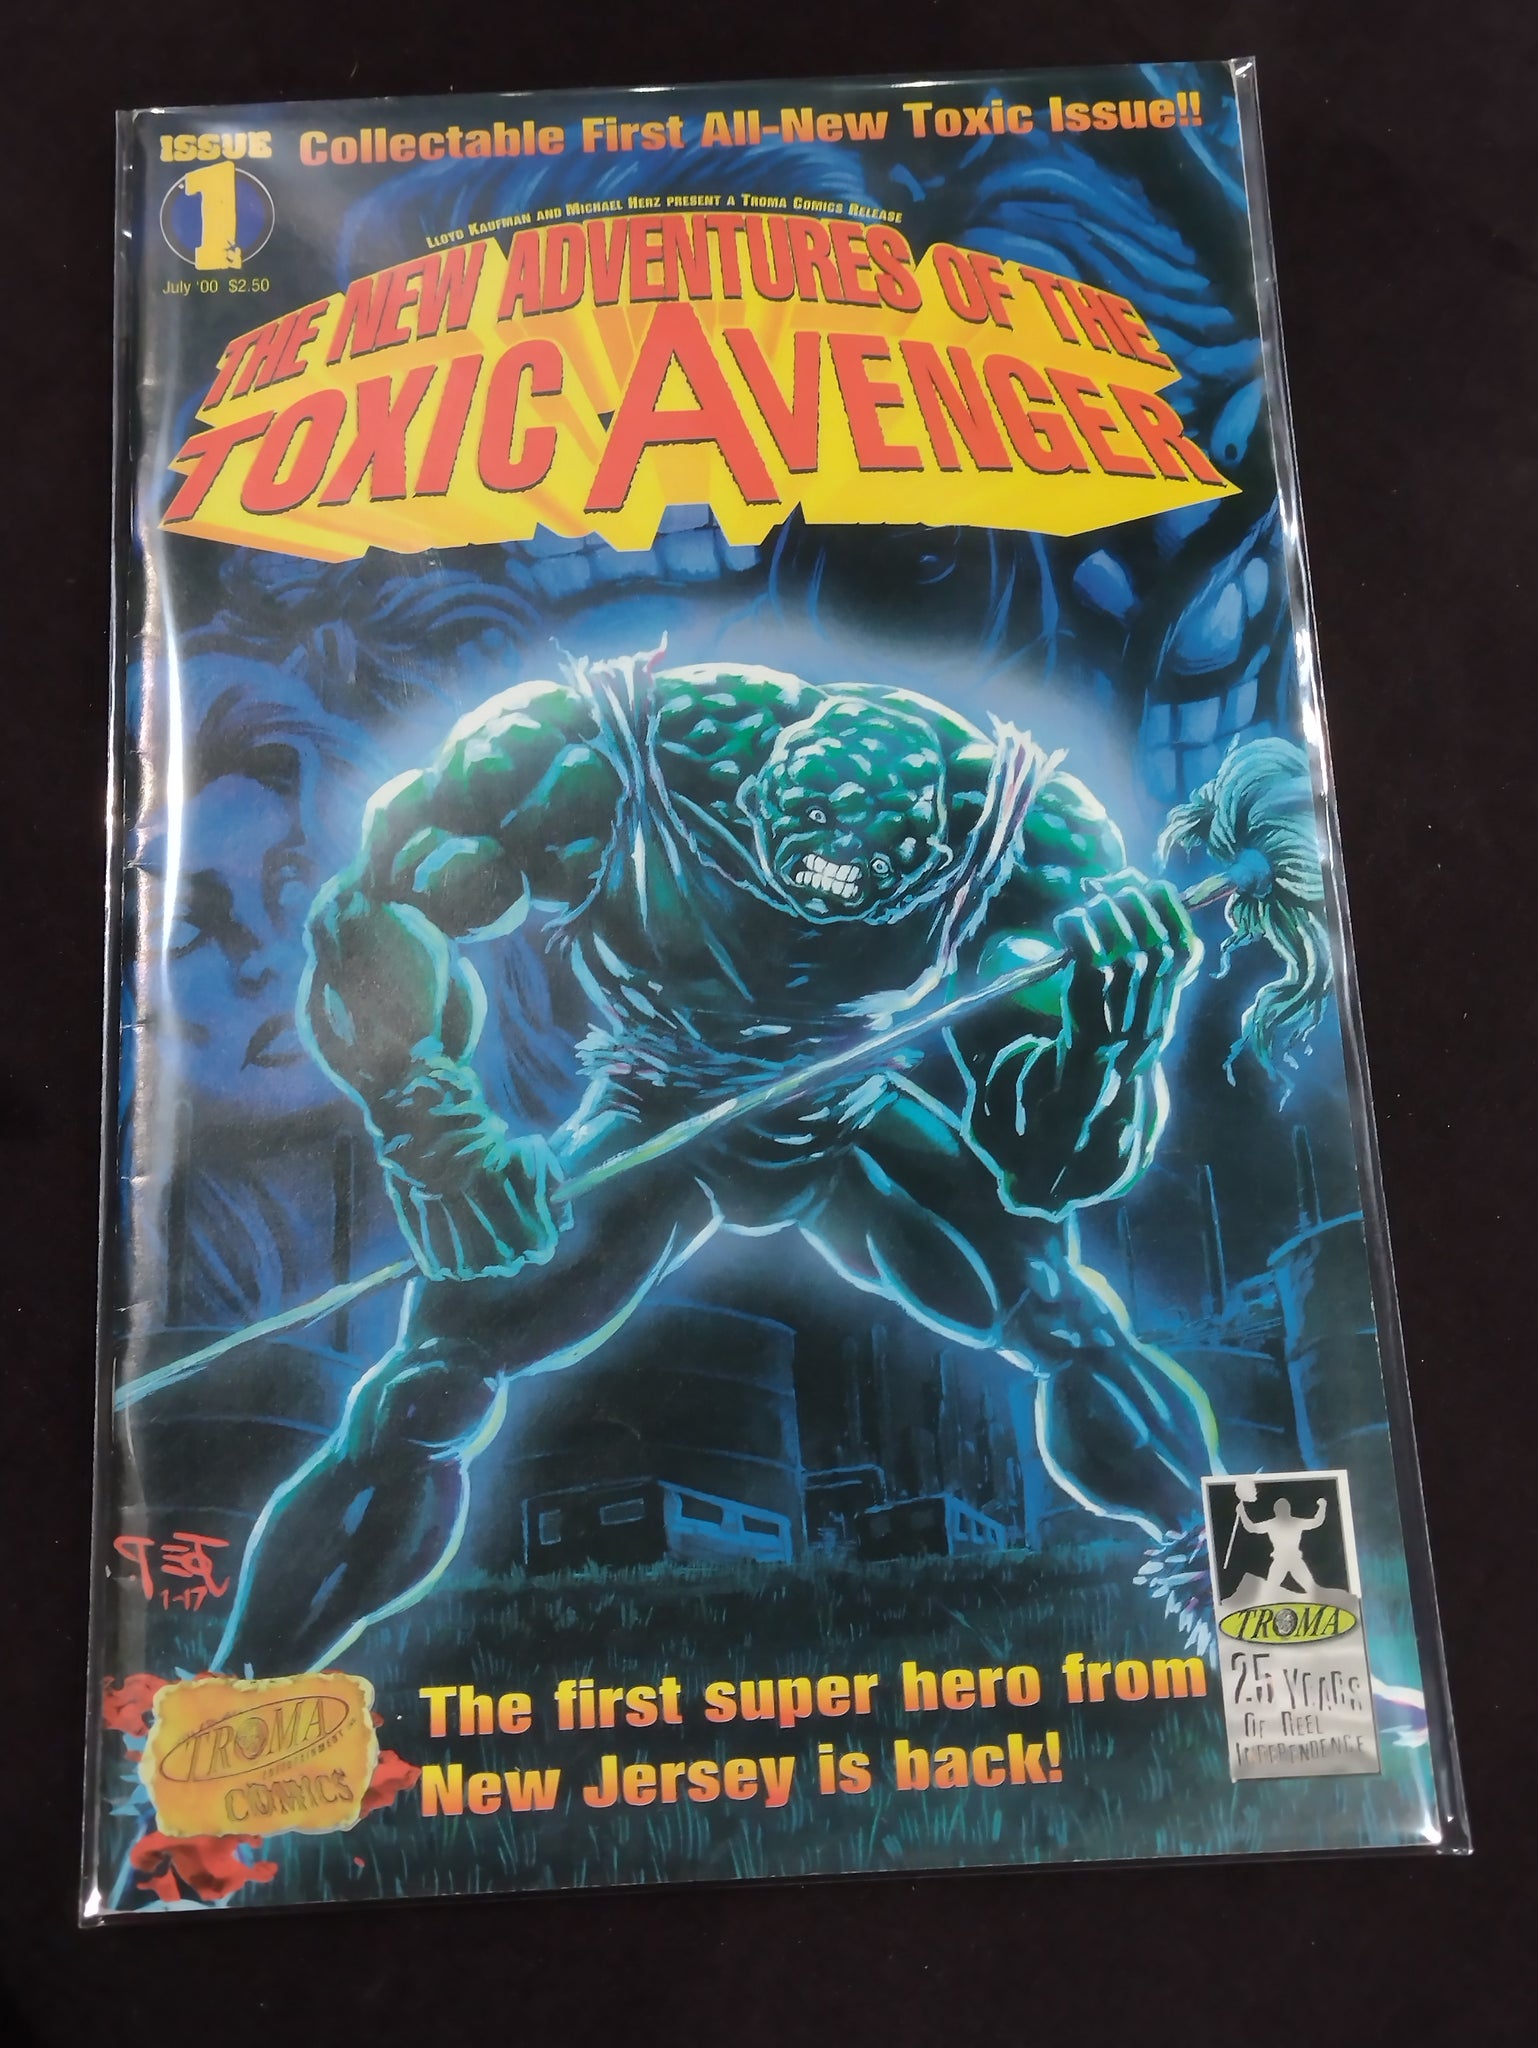 New Adventures of the Toxic Avenger #1 VF+